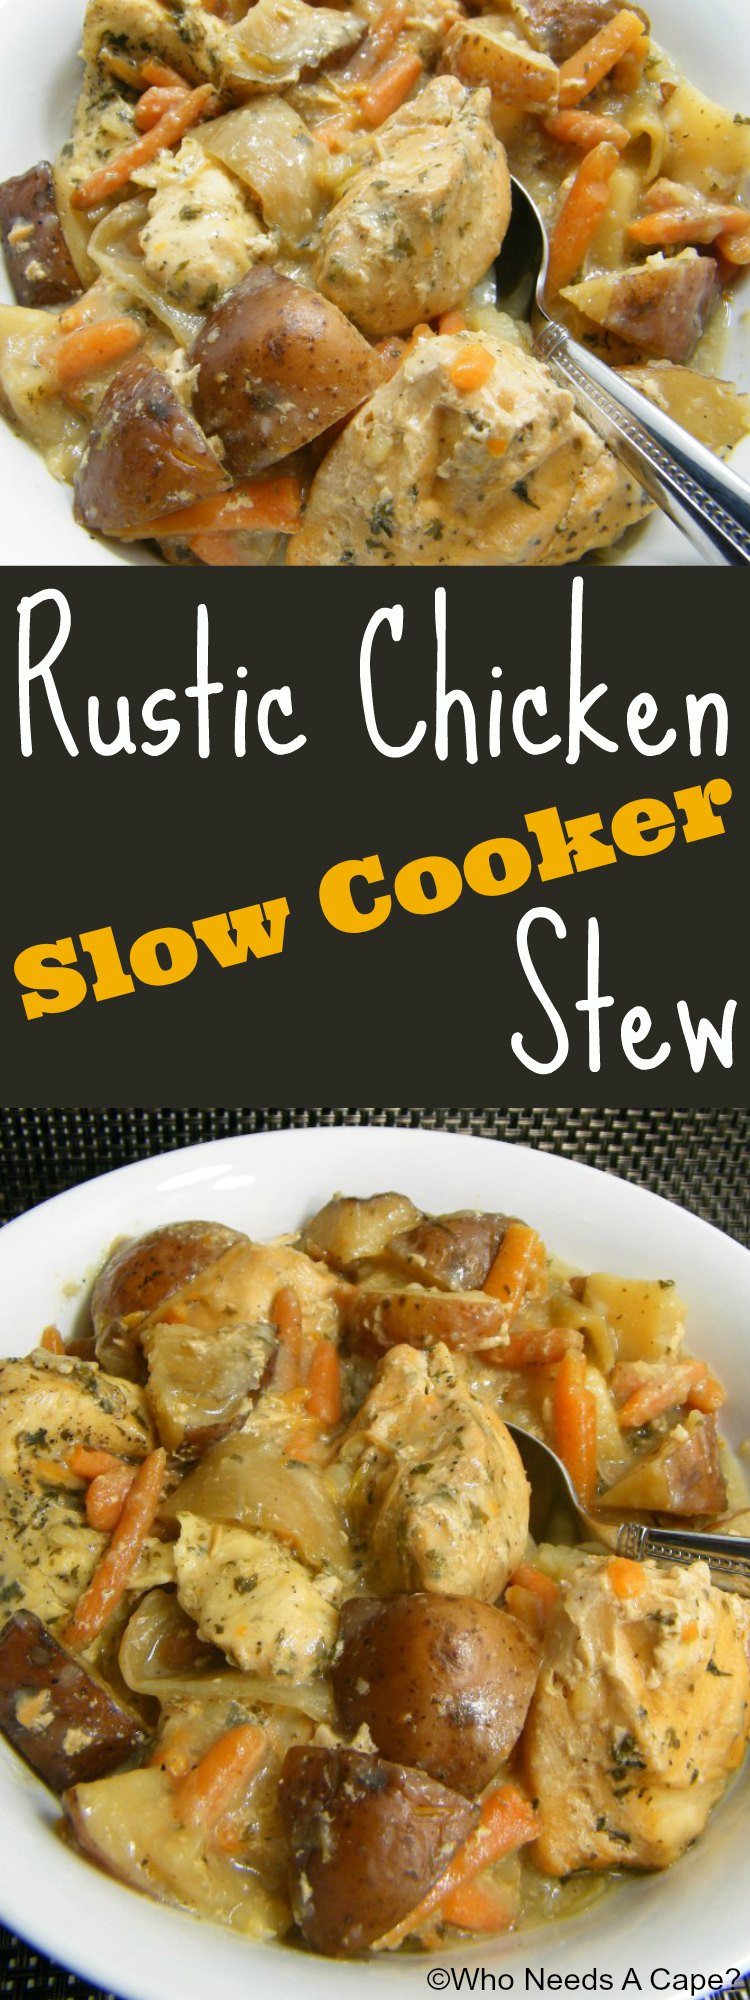 Chicken Potato Slow Cooker Stew
 Rustic Chicken Slow Cooker Stew Who Needs A Cape